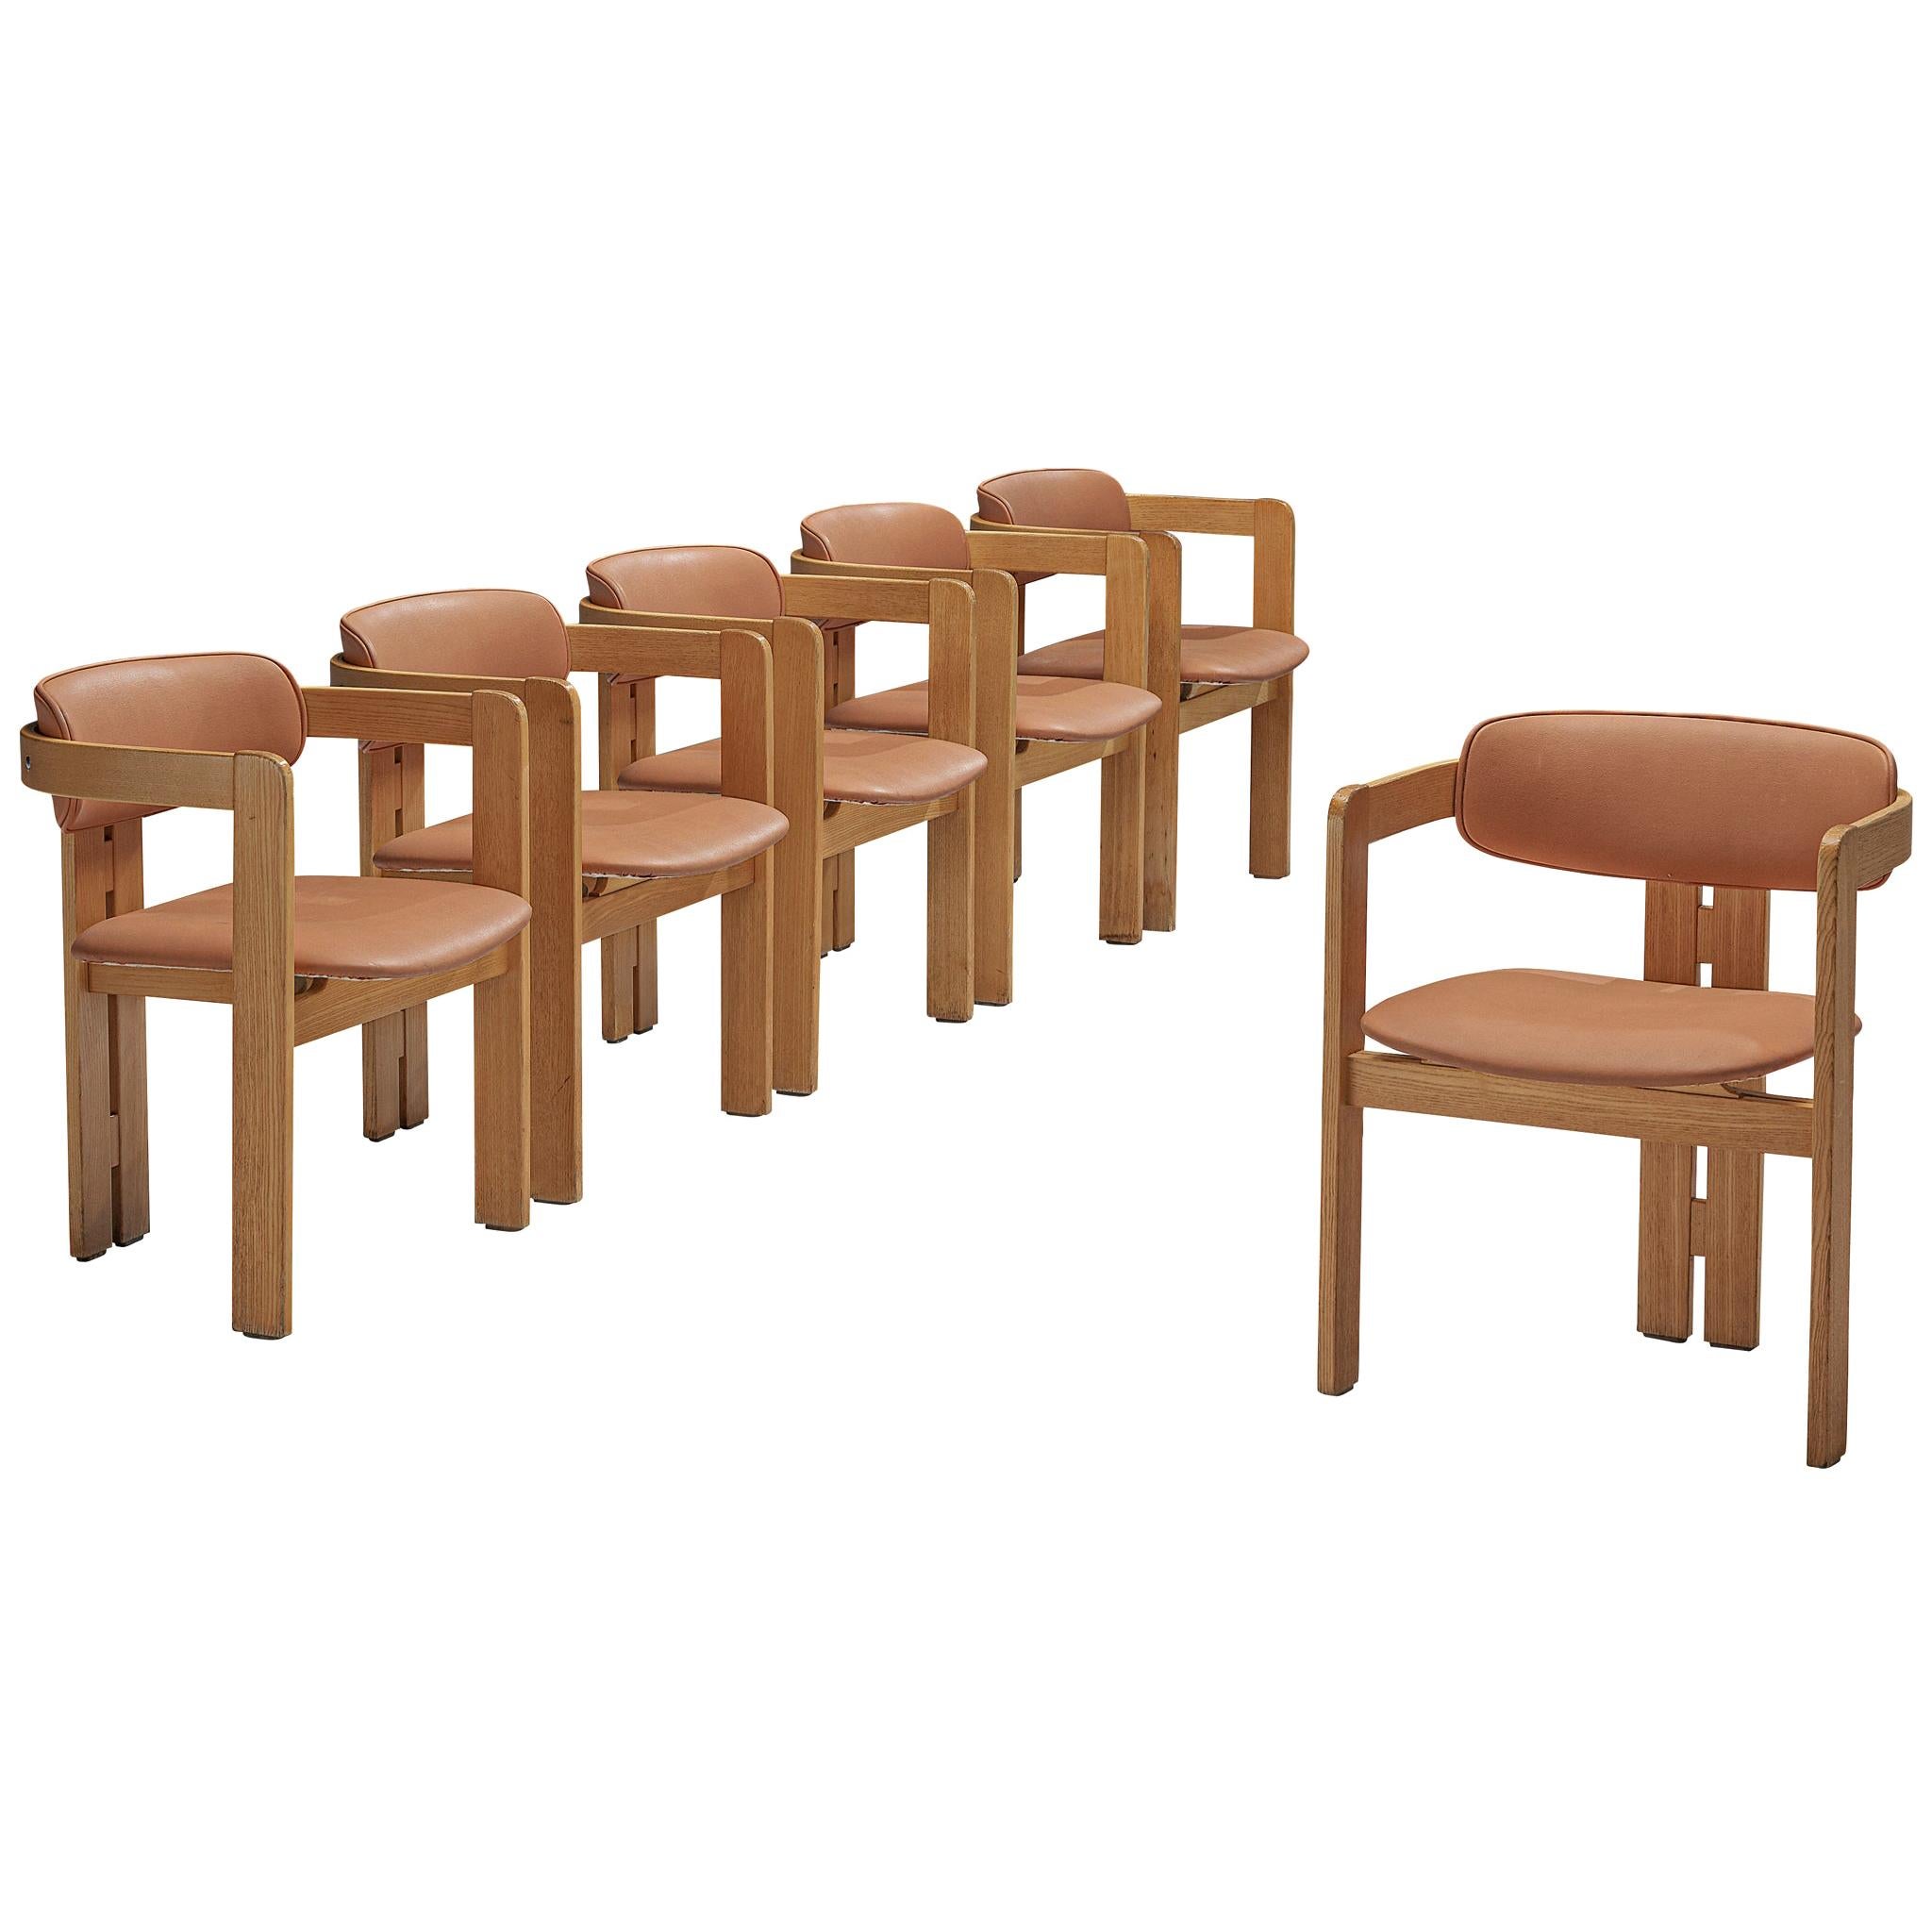 Set of six dining chairs, beech, leatherette, Italy, 1970s

This set of six Italian dining chairs has a strong resemblance to Augusto Savinis 'Pamplona' Chair (1965) and Afra & Tobia Scrapas 'Pigreco' chair (1959/60) yet the designs are different